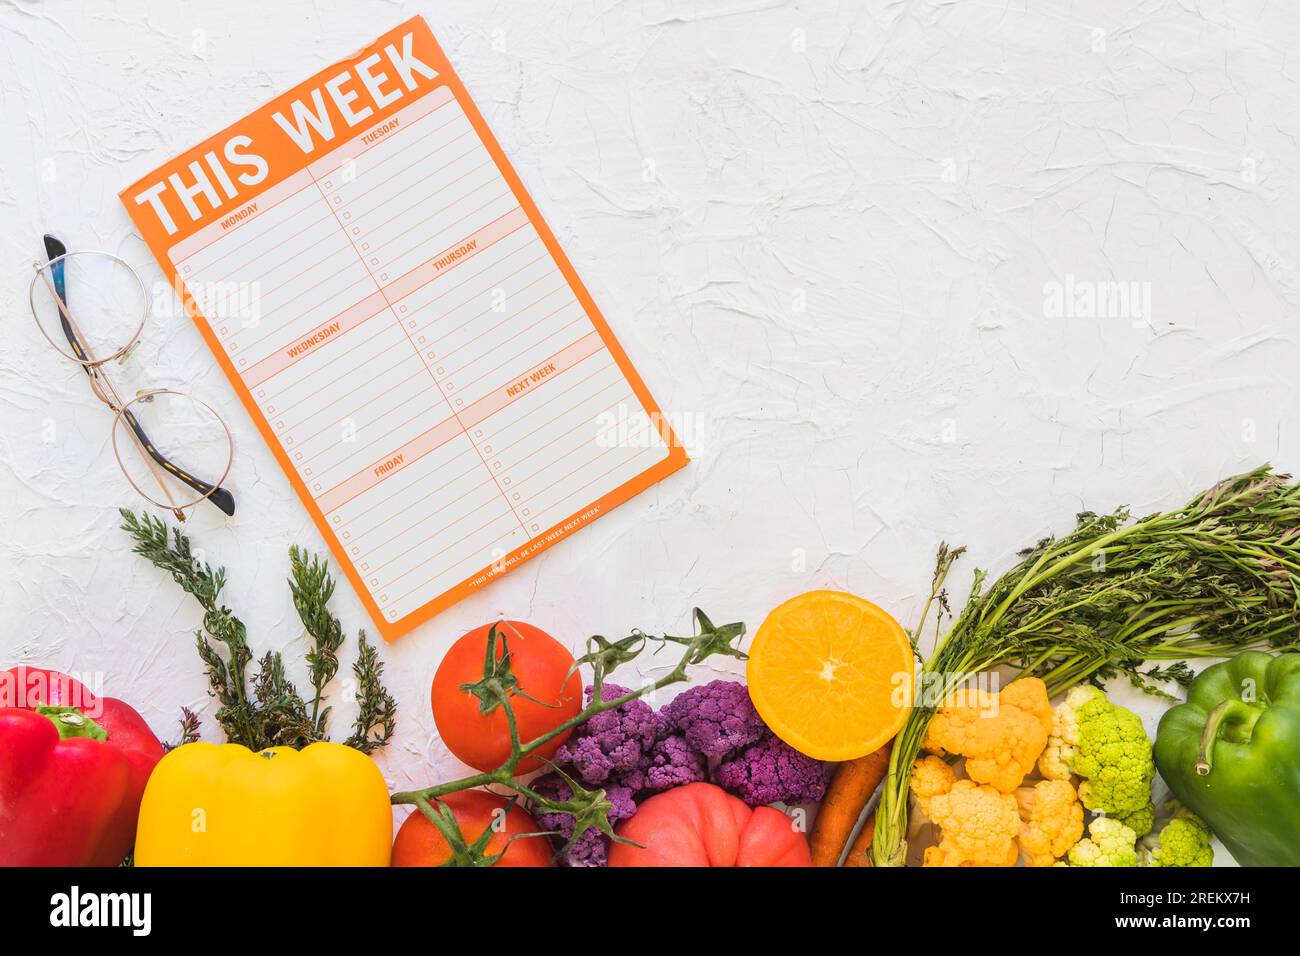 Weekly meal plan with colorful fruits vegetables textured background. Beautiful photo Stock Photo